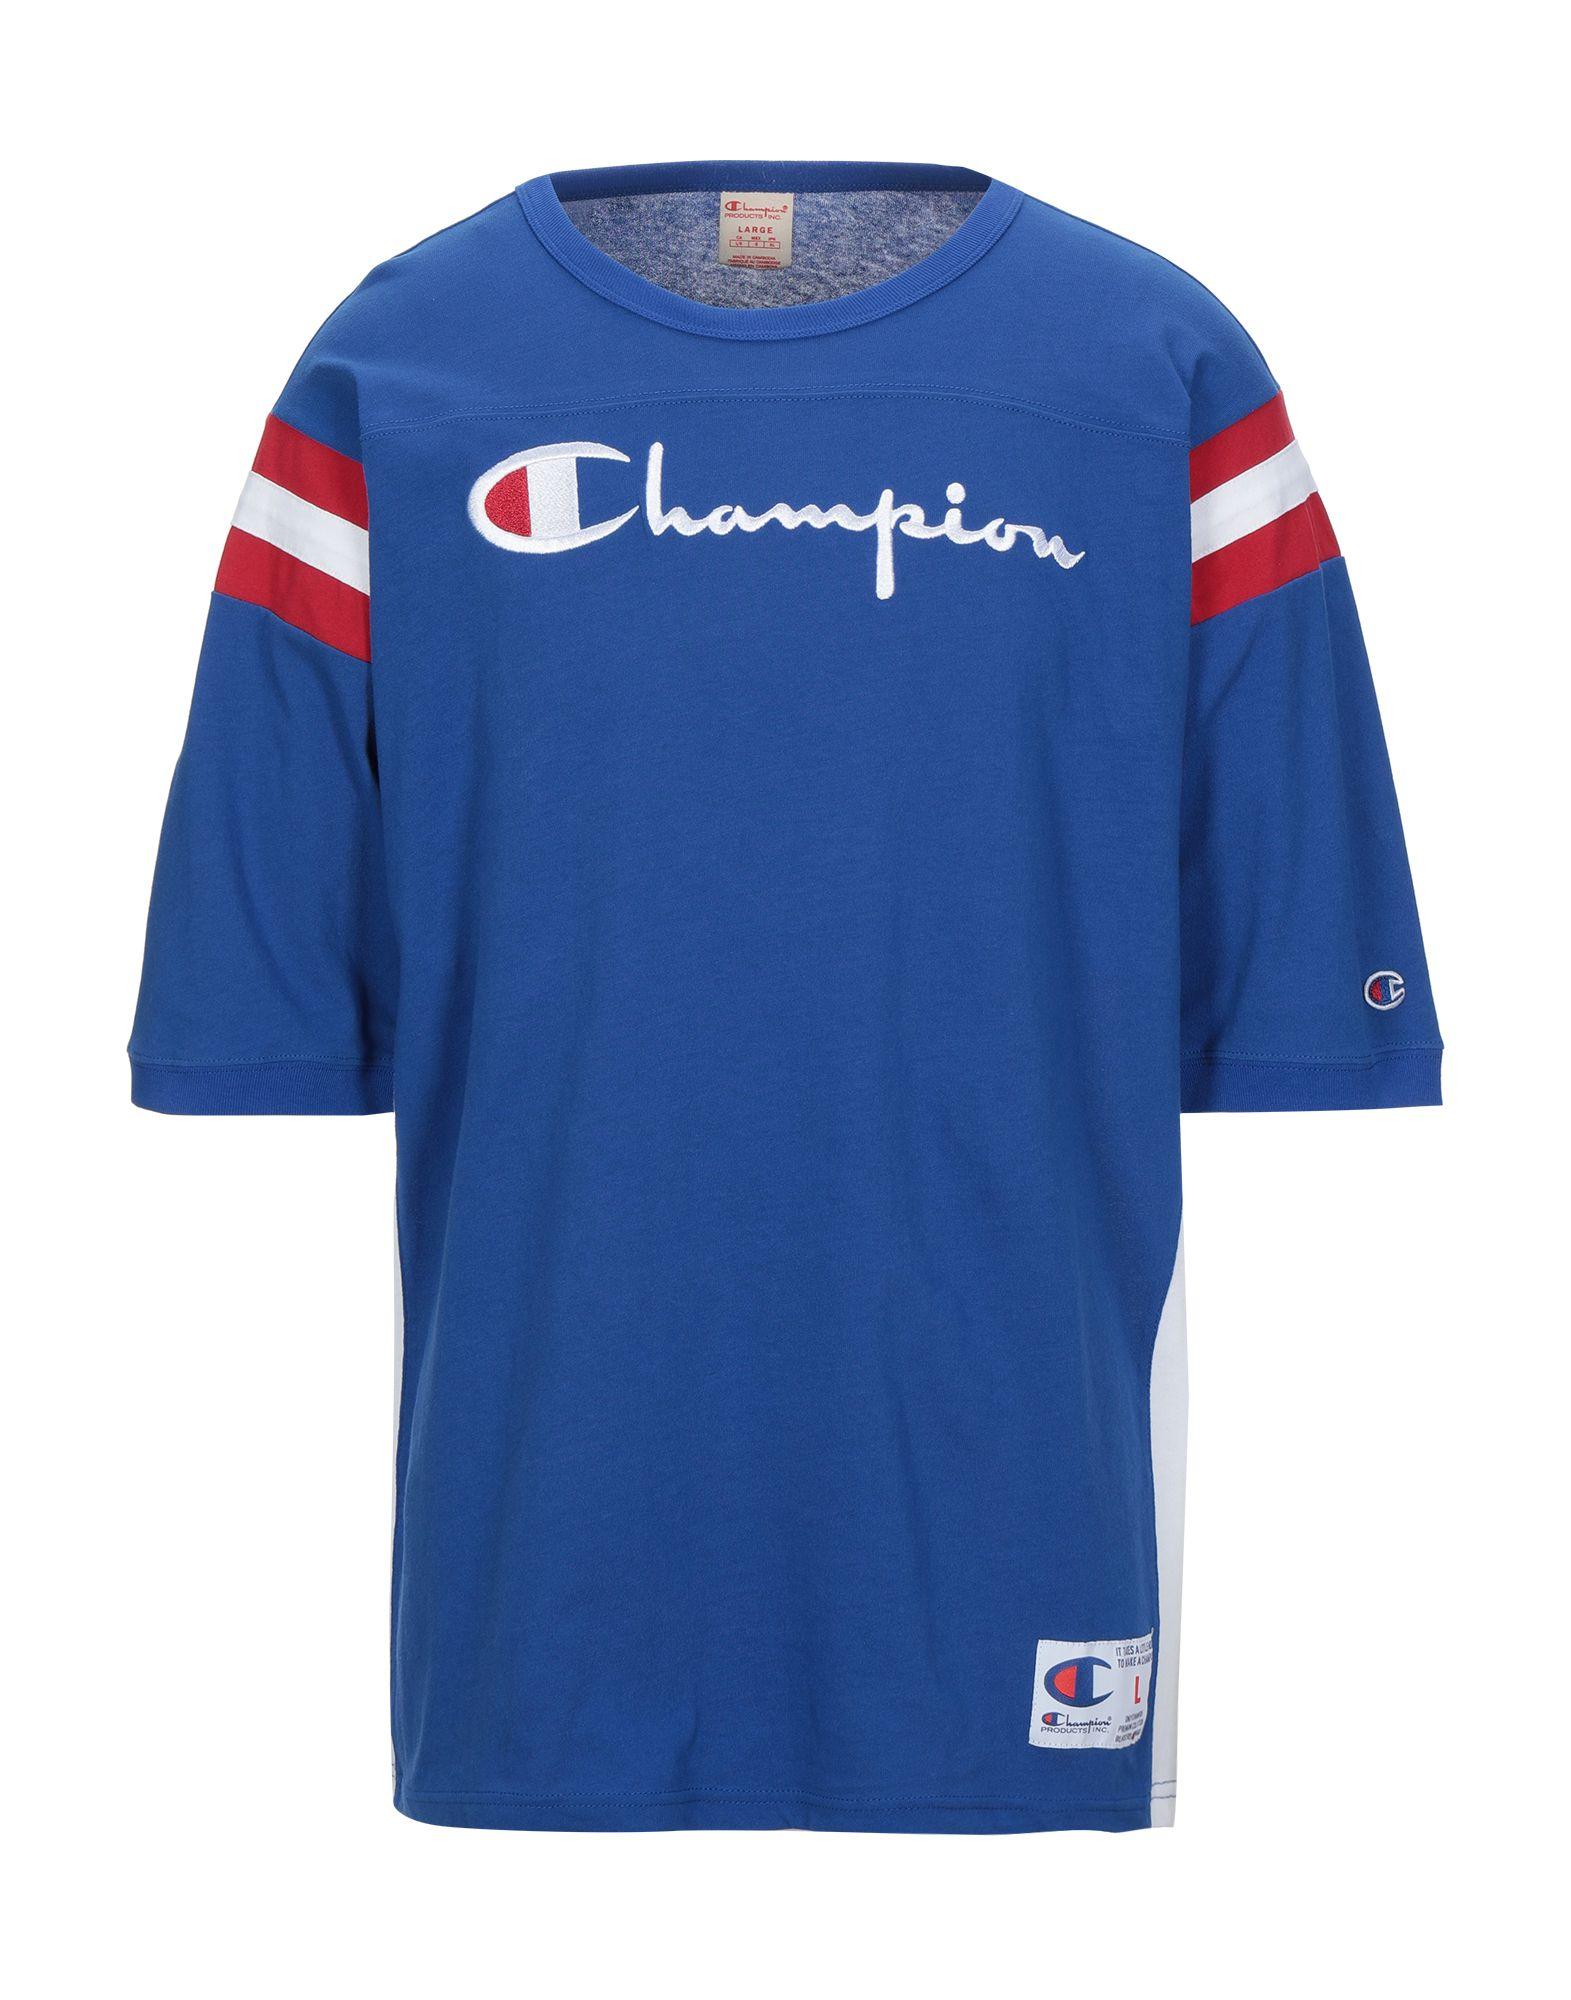 Champion T-shirt in Blue for Men - Lyst